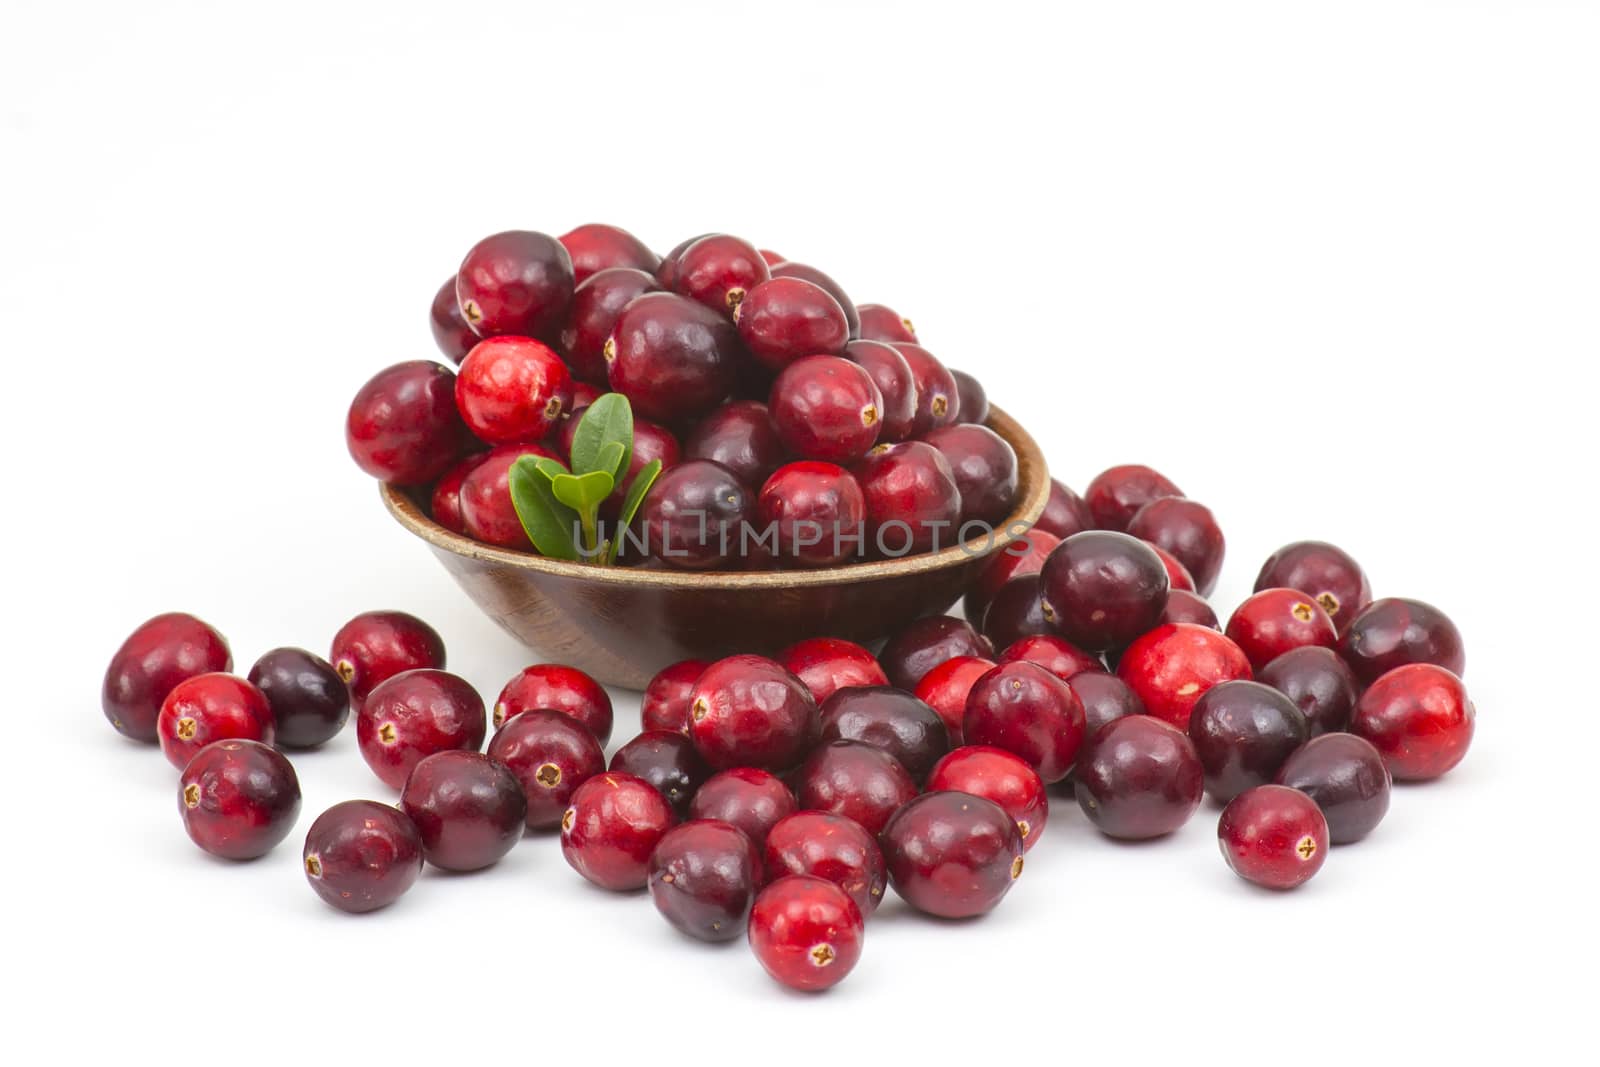 Cranberries in wooden bowl on white background. by miradrozdowski